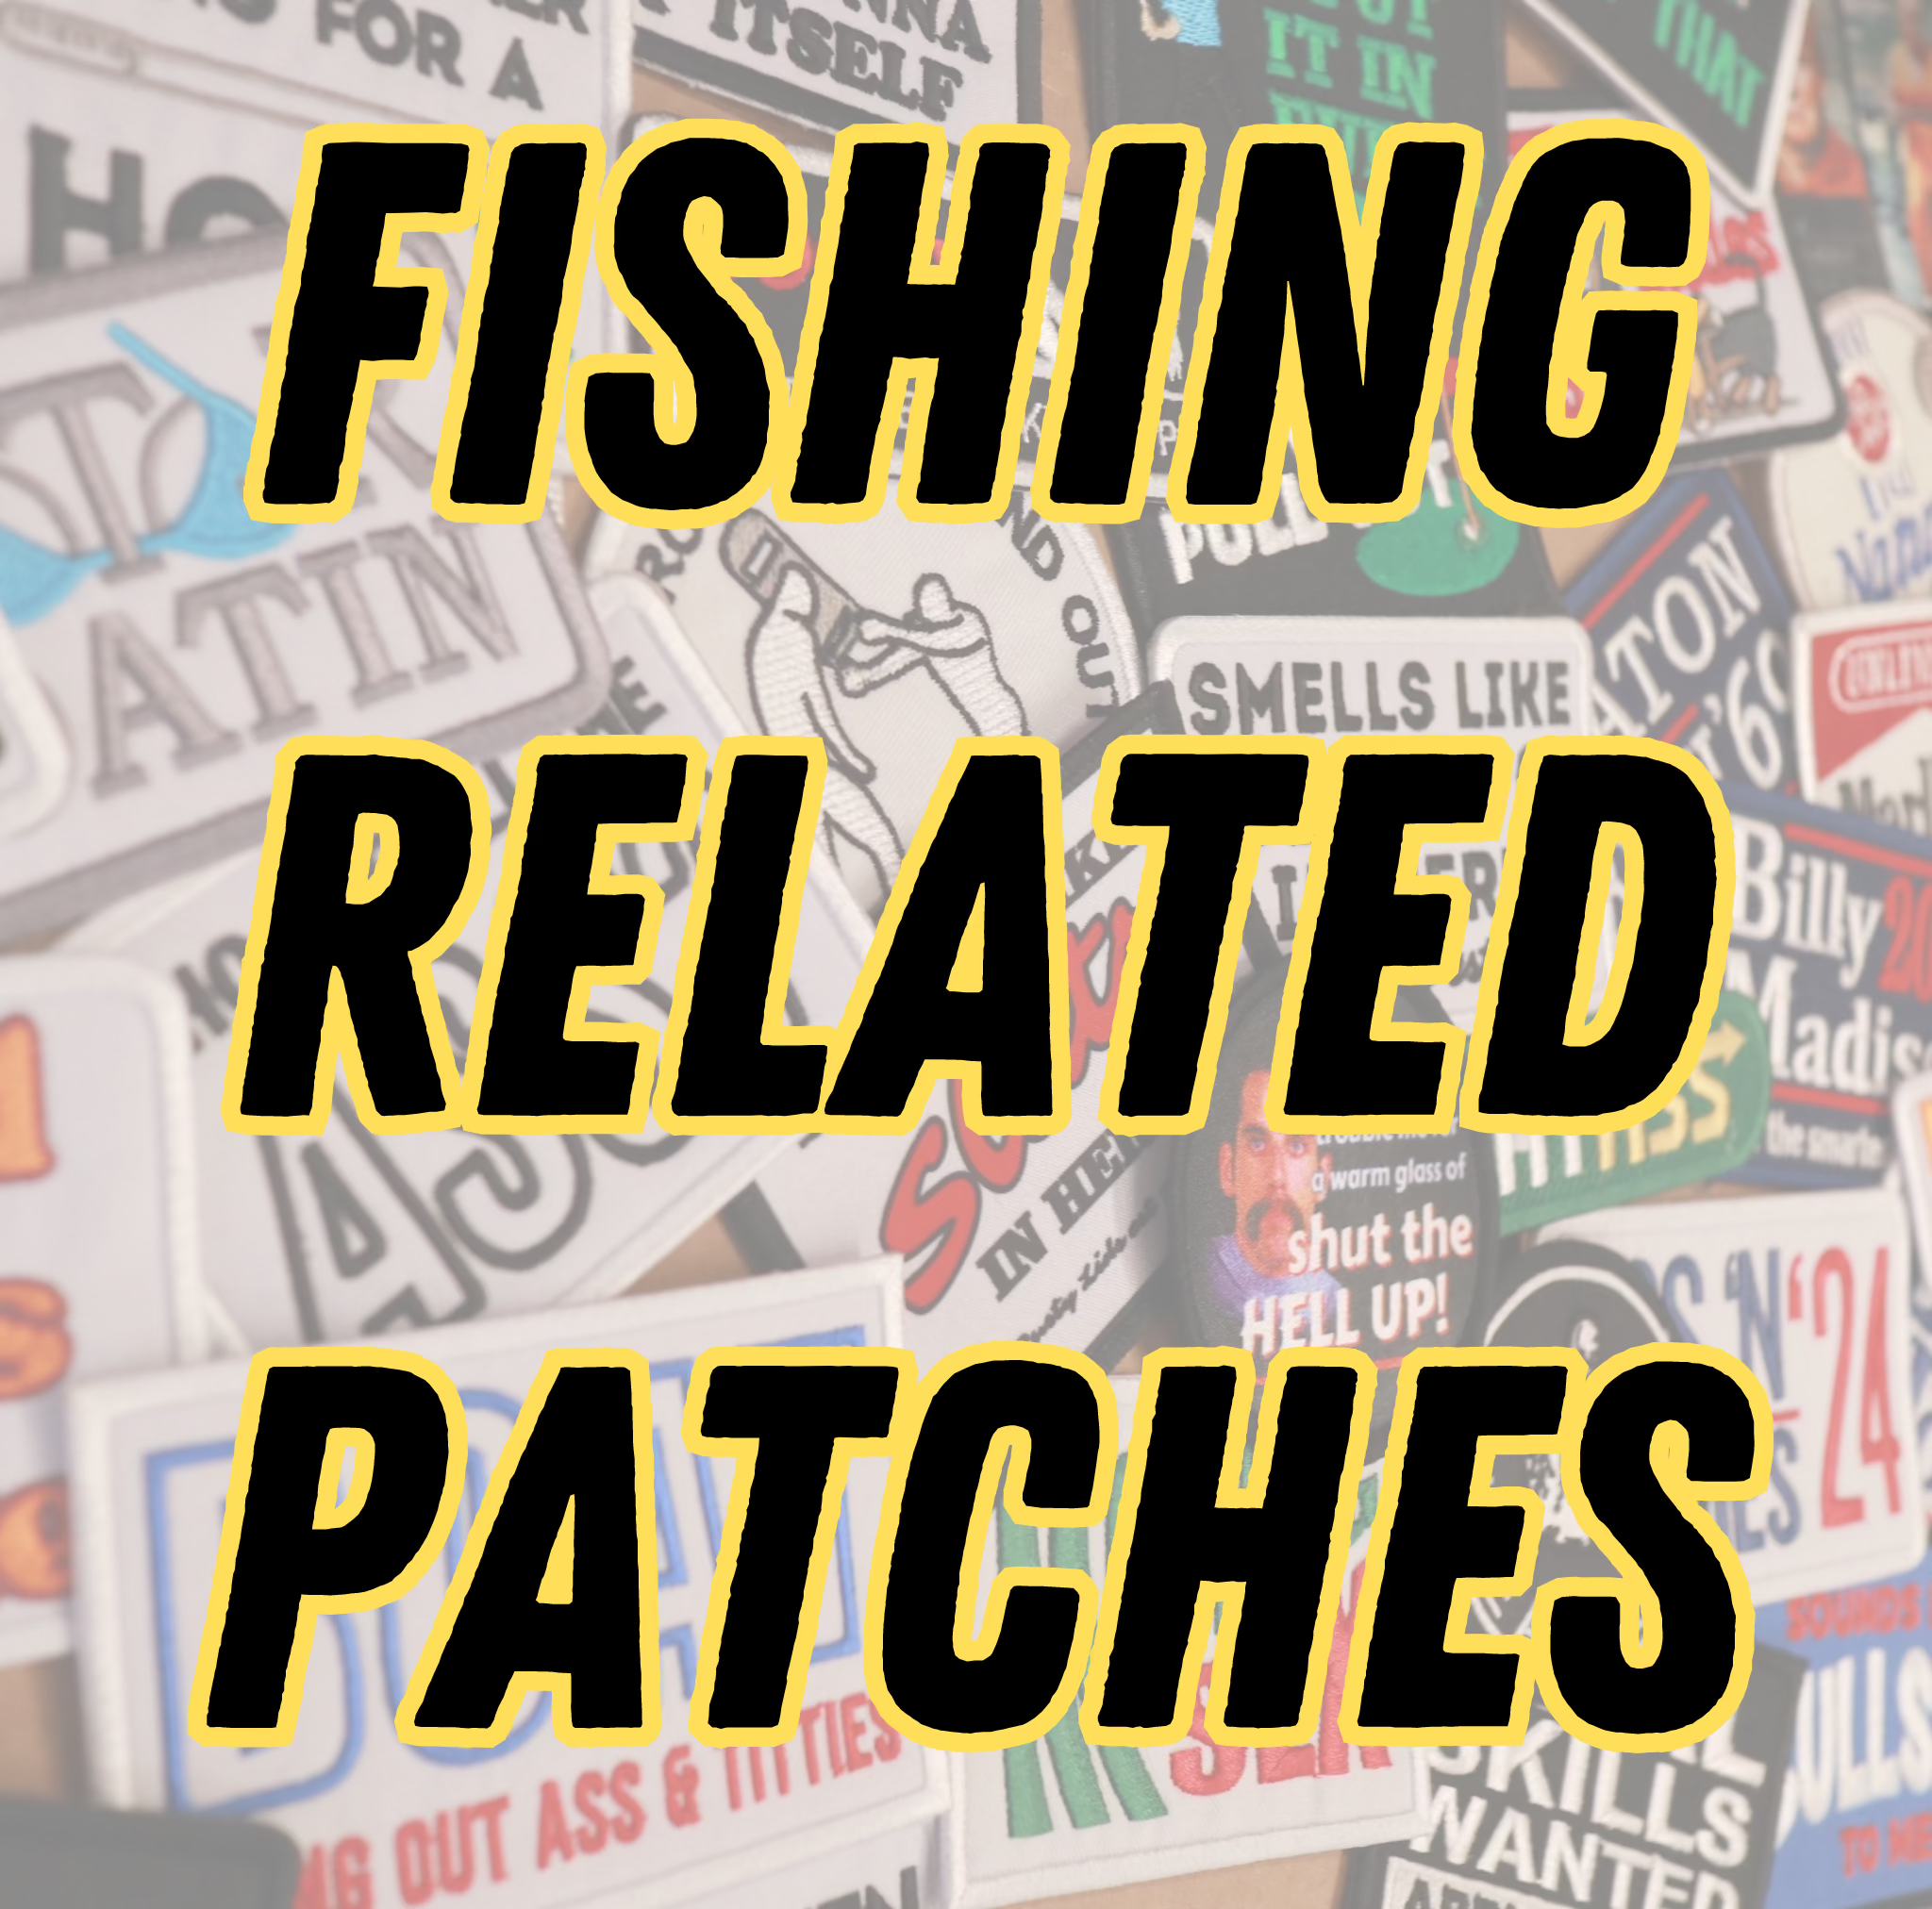 Fishing Related Patches